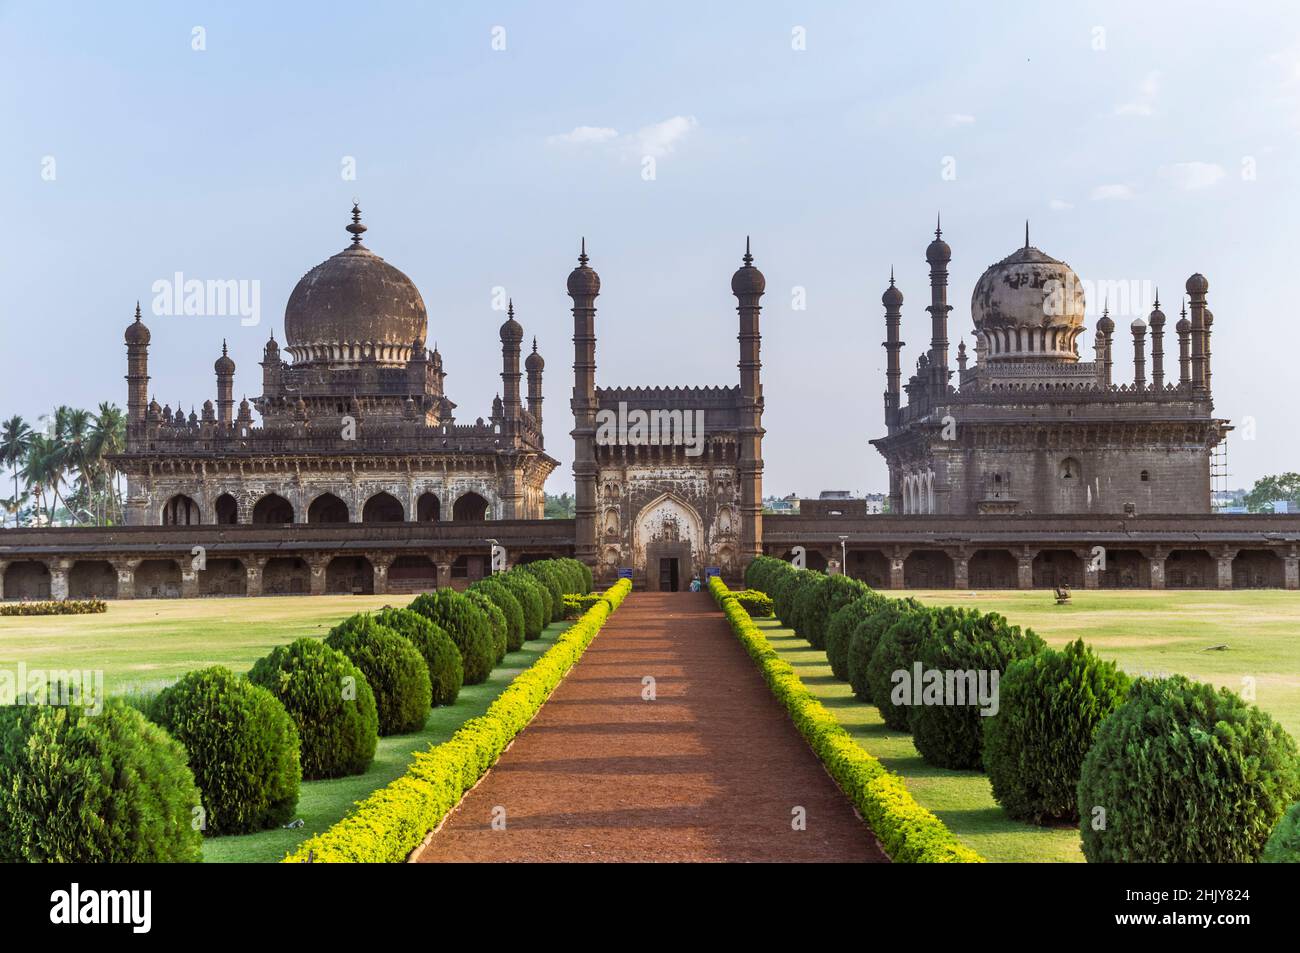 Bijapur, Karnataka, India : 17th century Ibrahim Rouza mausoleum and mosque considered as one of the most beautifully proportioned Islamic monuments i Stock Photo